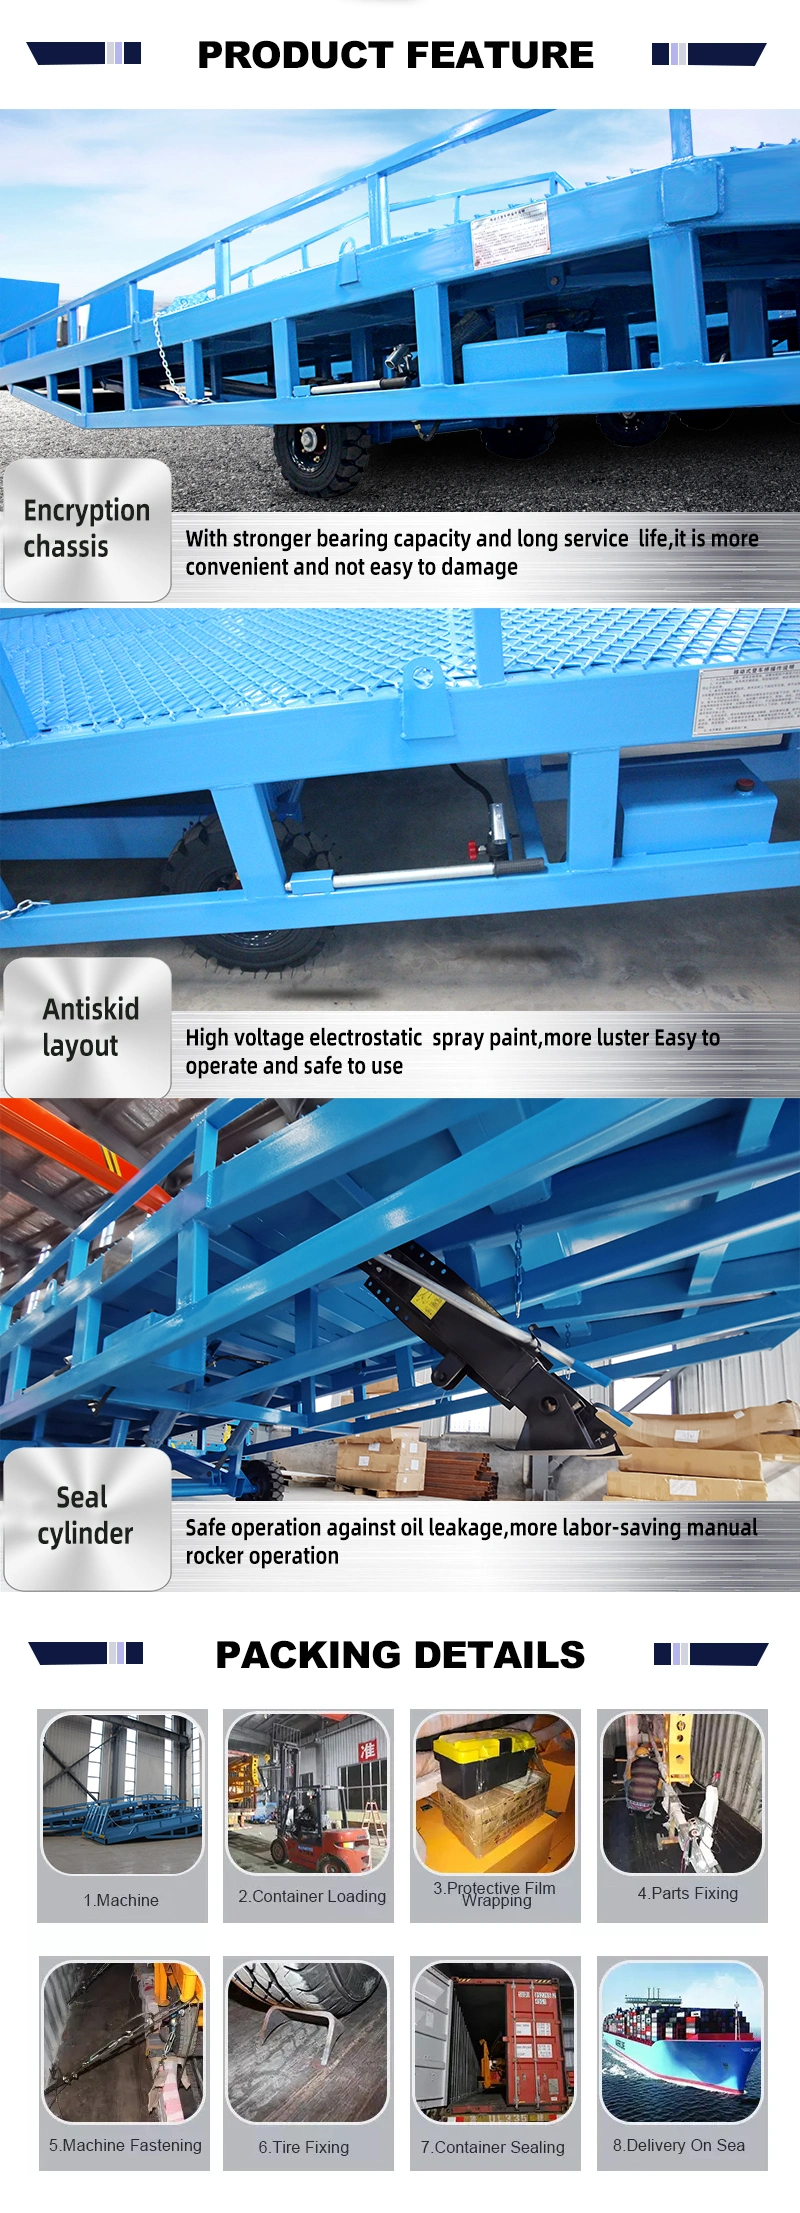 Mobile Yard Ramp Moveable Hydraulic Container Loading Ramp Manual Forklift Ramp